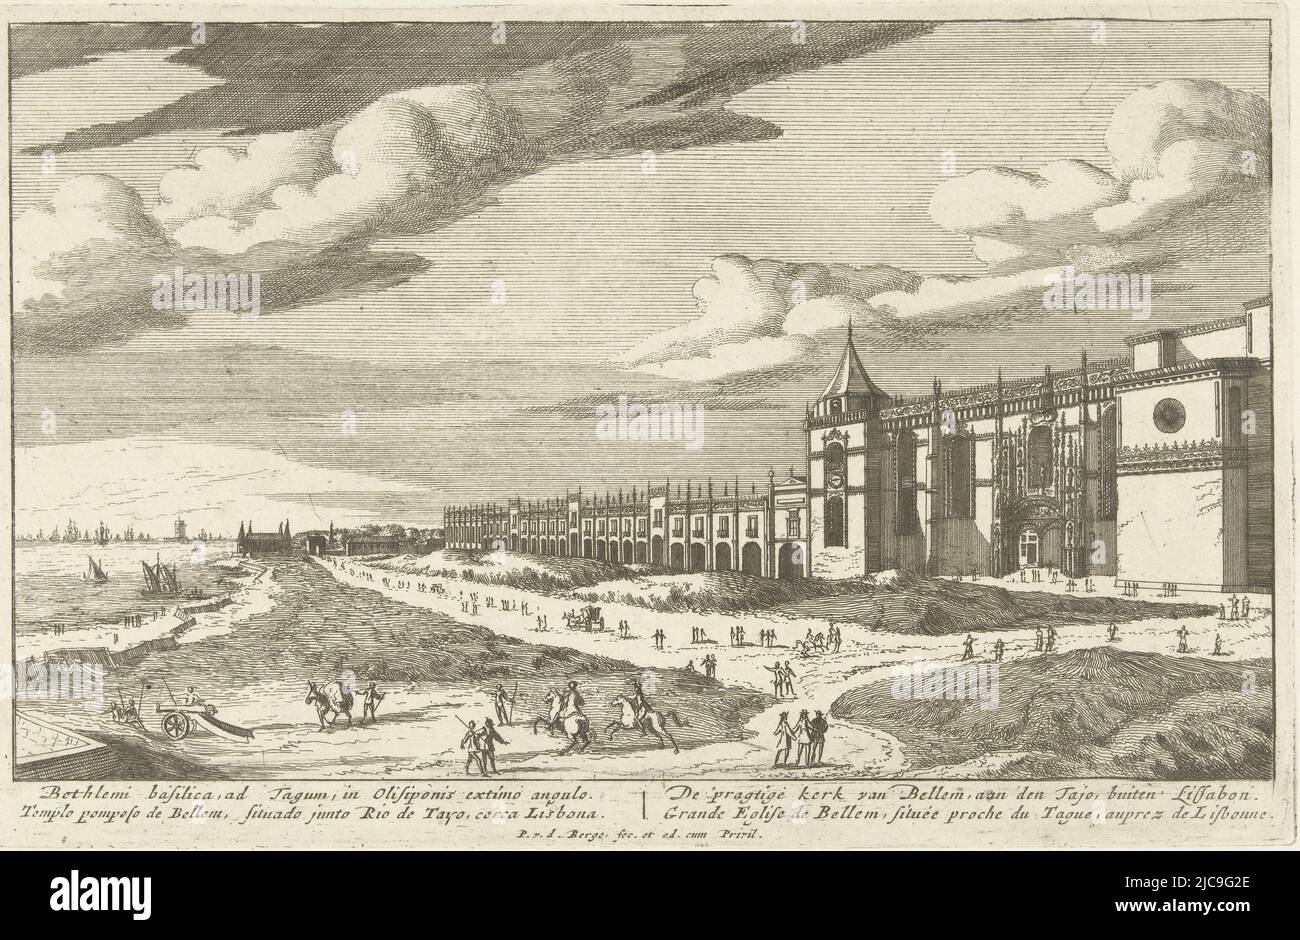 View of the Hieronymus Monastery at Bel, print maker: Pieter van den Berge, (mentioned on object), publisher: Pieter van den Berge, (mentioned on object), Staten van Holland en West-Friesland, (mentioned on object), Amsterdam, 1694 - 1737, paper, etching, h 167 mm × w 258 mm Stock Photo